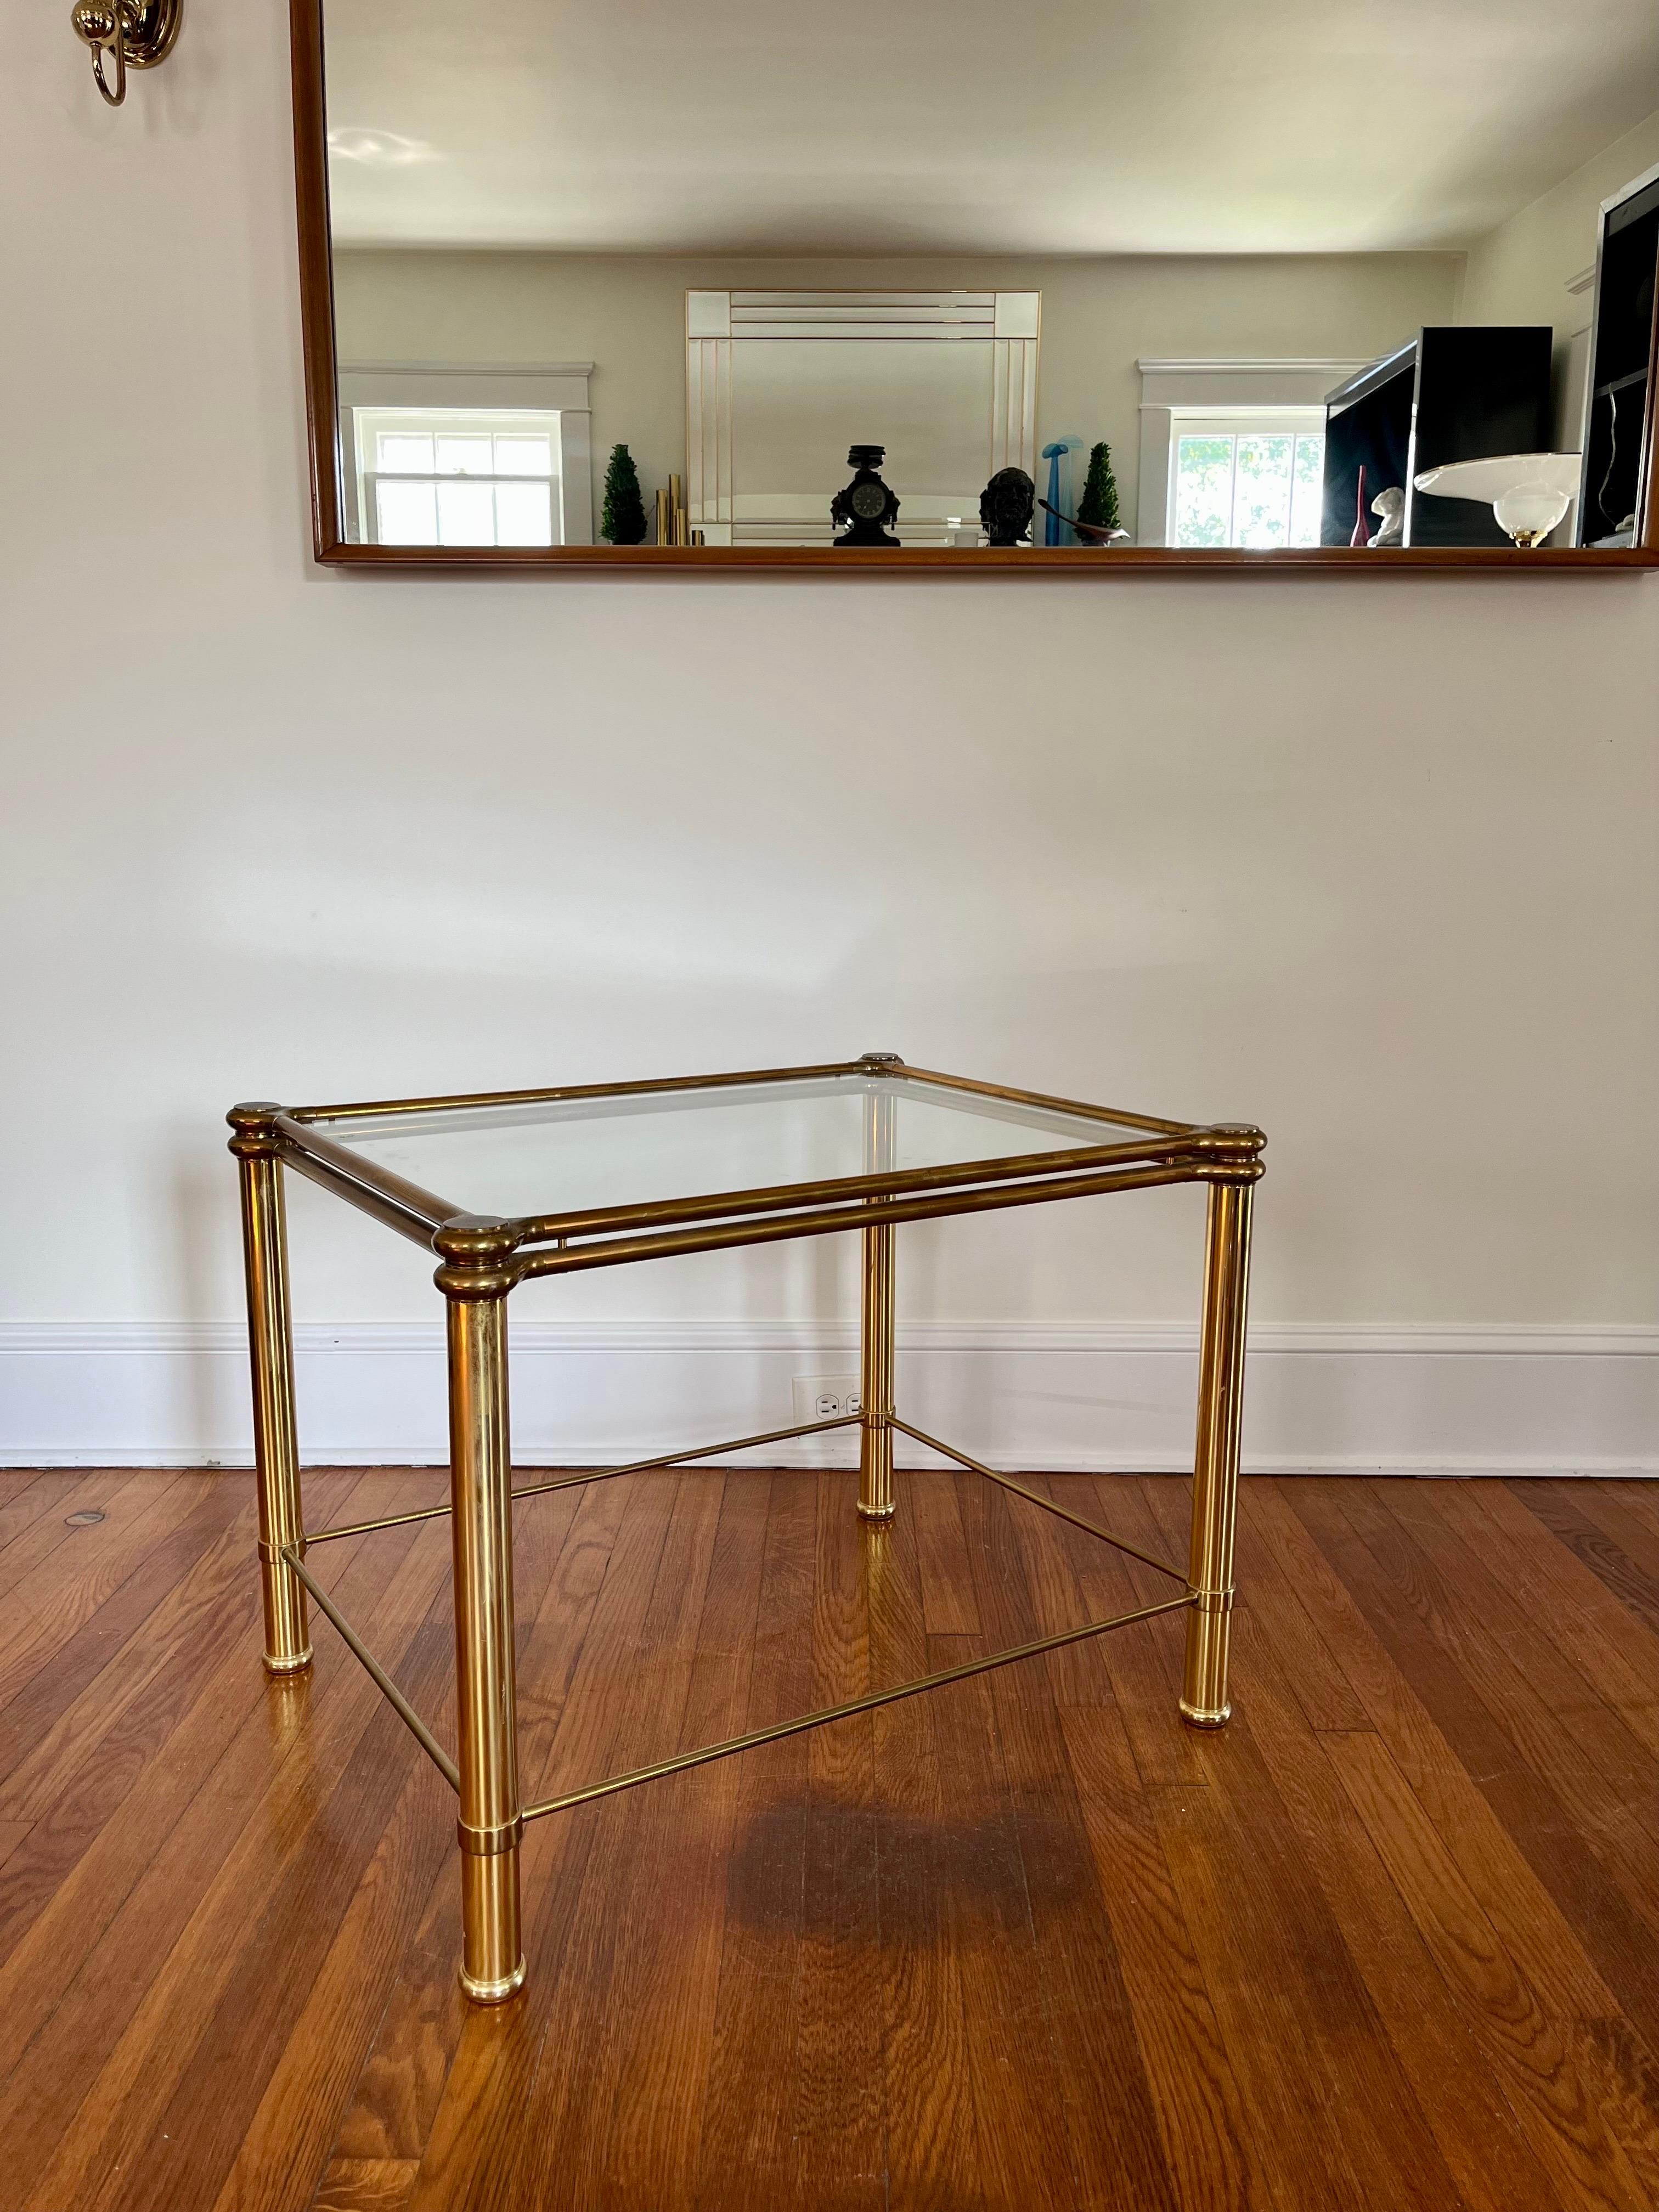 Beautiful brass and glass side or cocktail table. Great detail with rounded corners and stretcher design. Inset glass for clean finished look. Nice patina.
Curbside to NYC/Philly $400